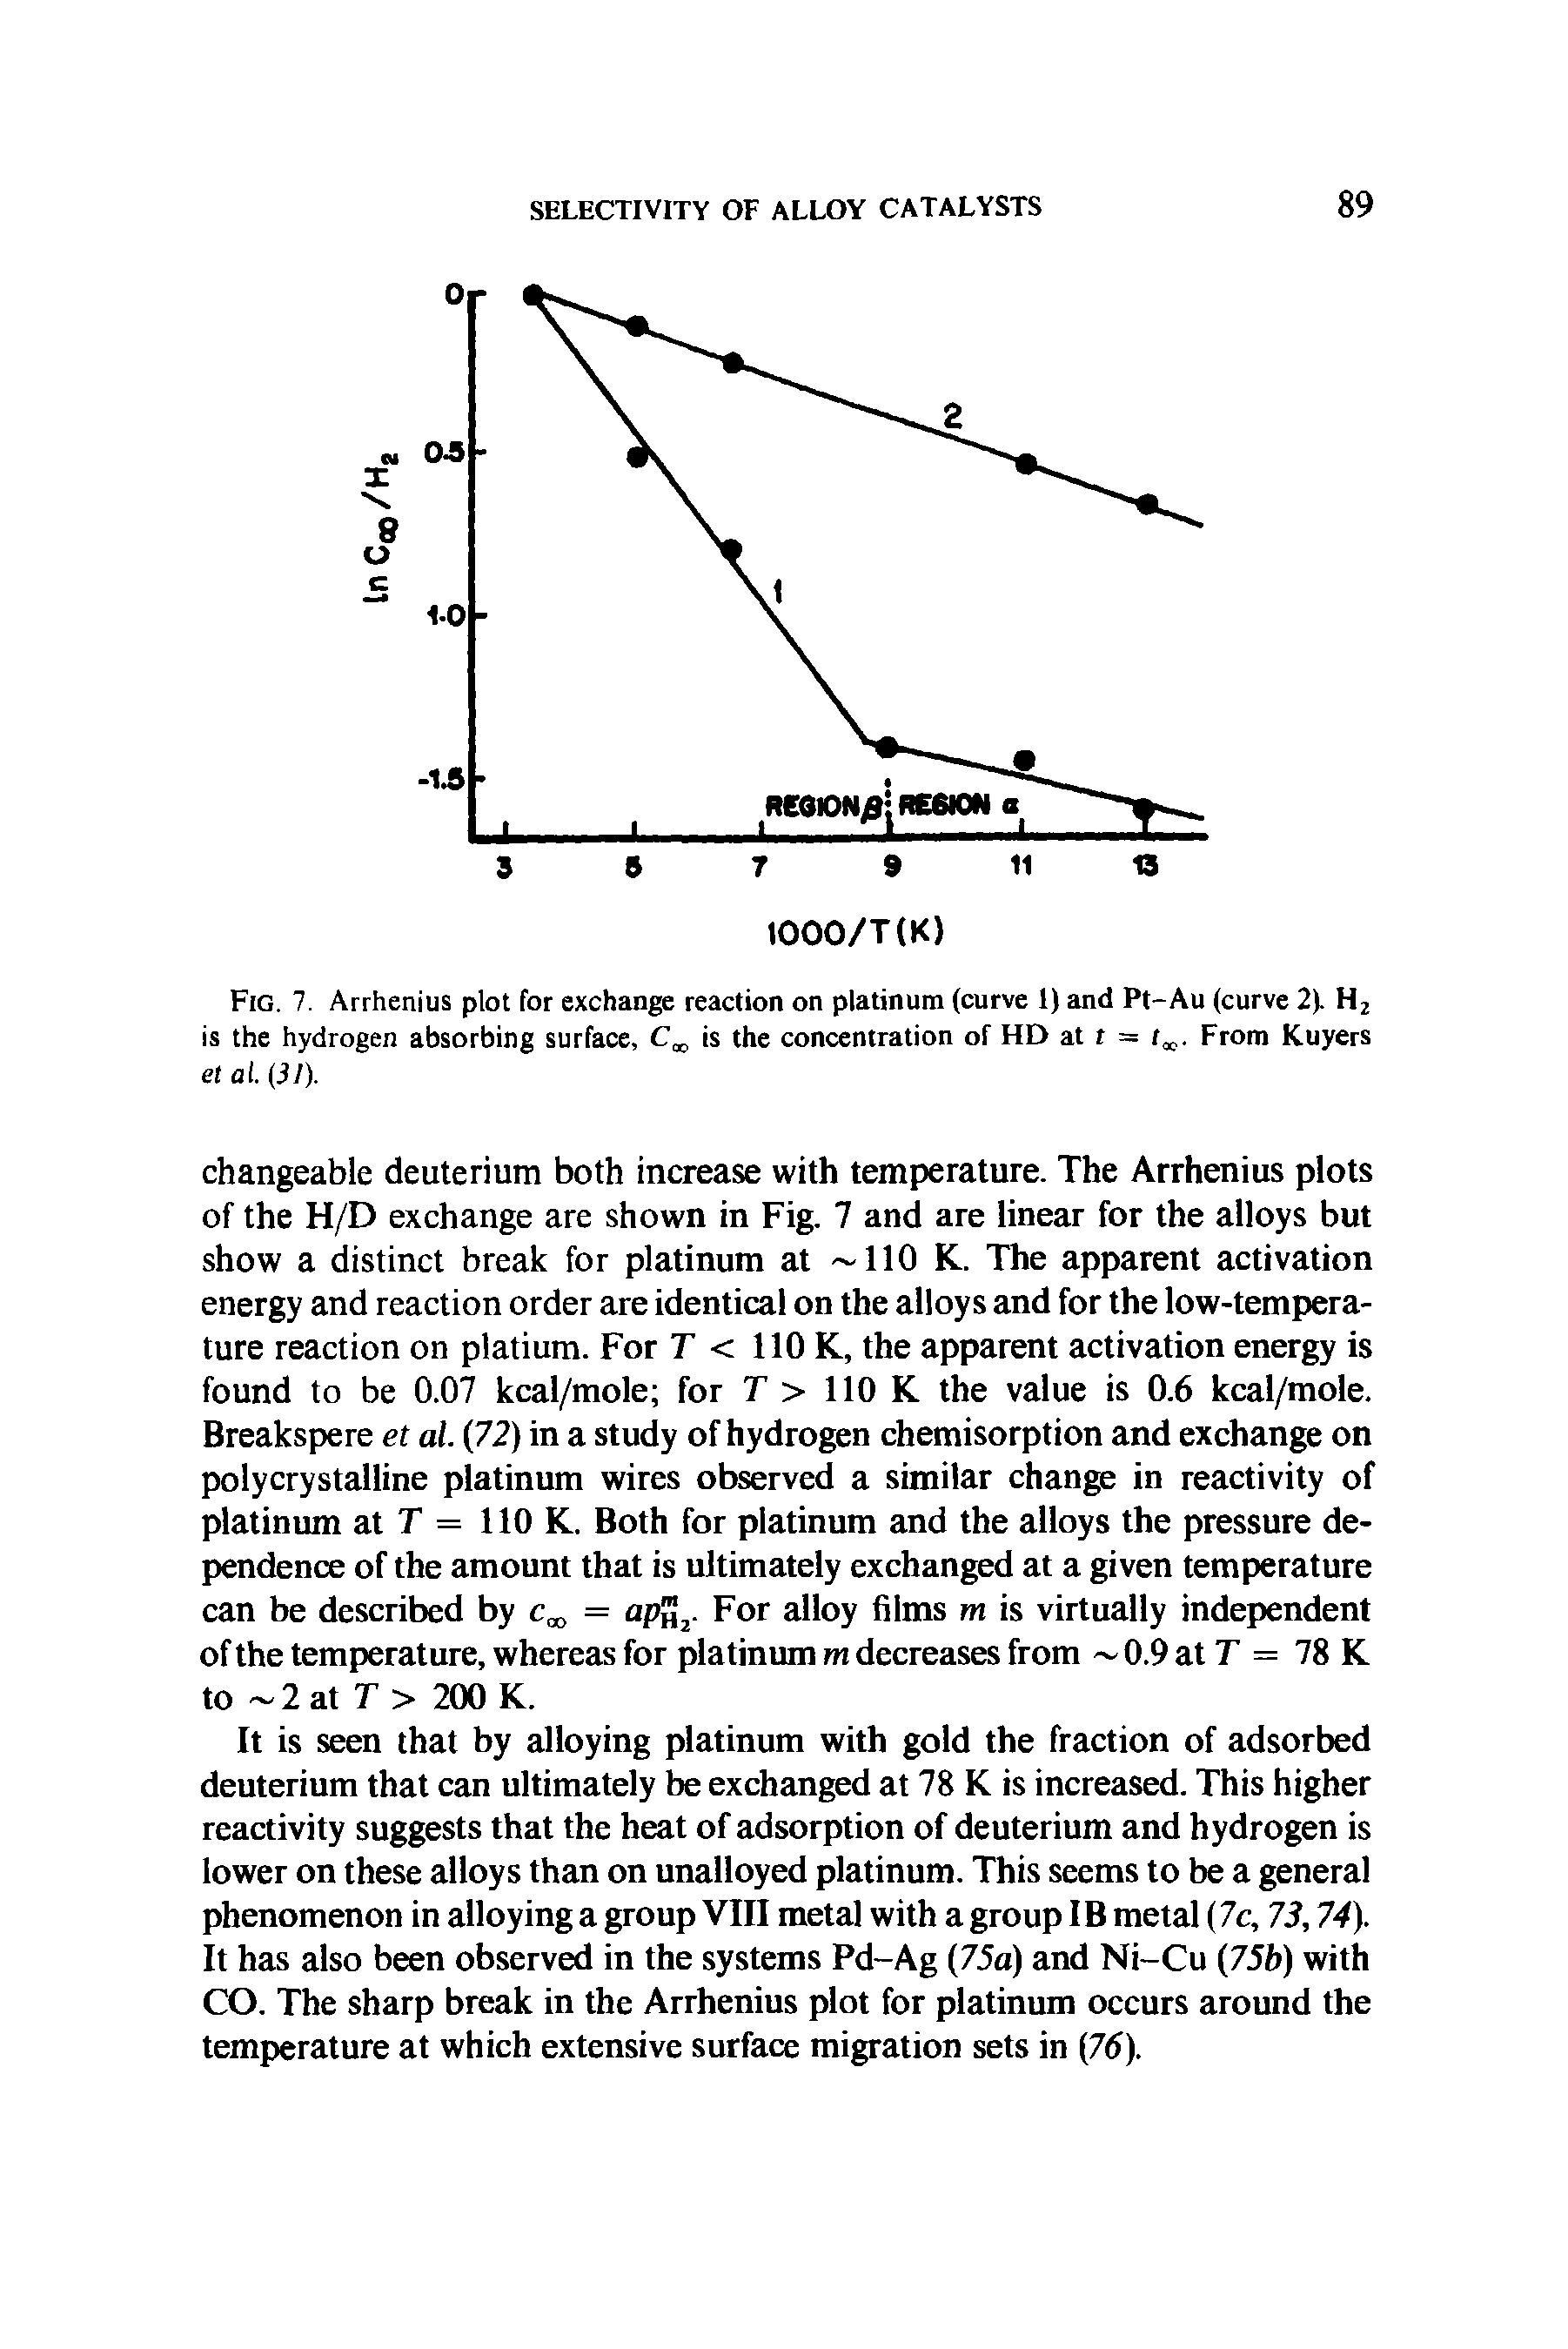 Fig. 7. Arrhenius plot for exchange reaction on platinum (curve 1) and Pt-Au (curve 2). H2 is the hydrogen absorbing surface, C is the concentration of HD at t = tx. From Kuyers et al. (31).